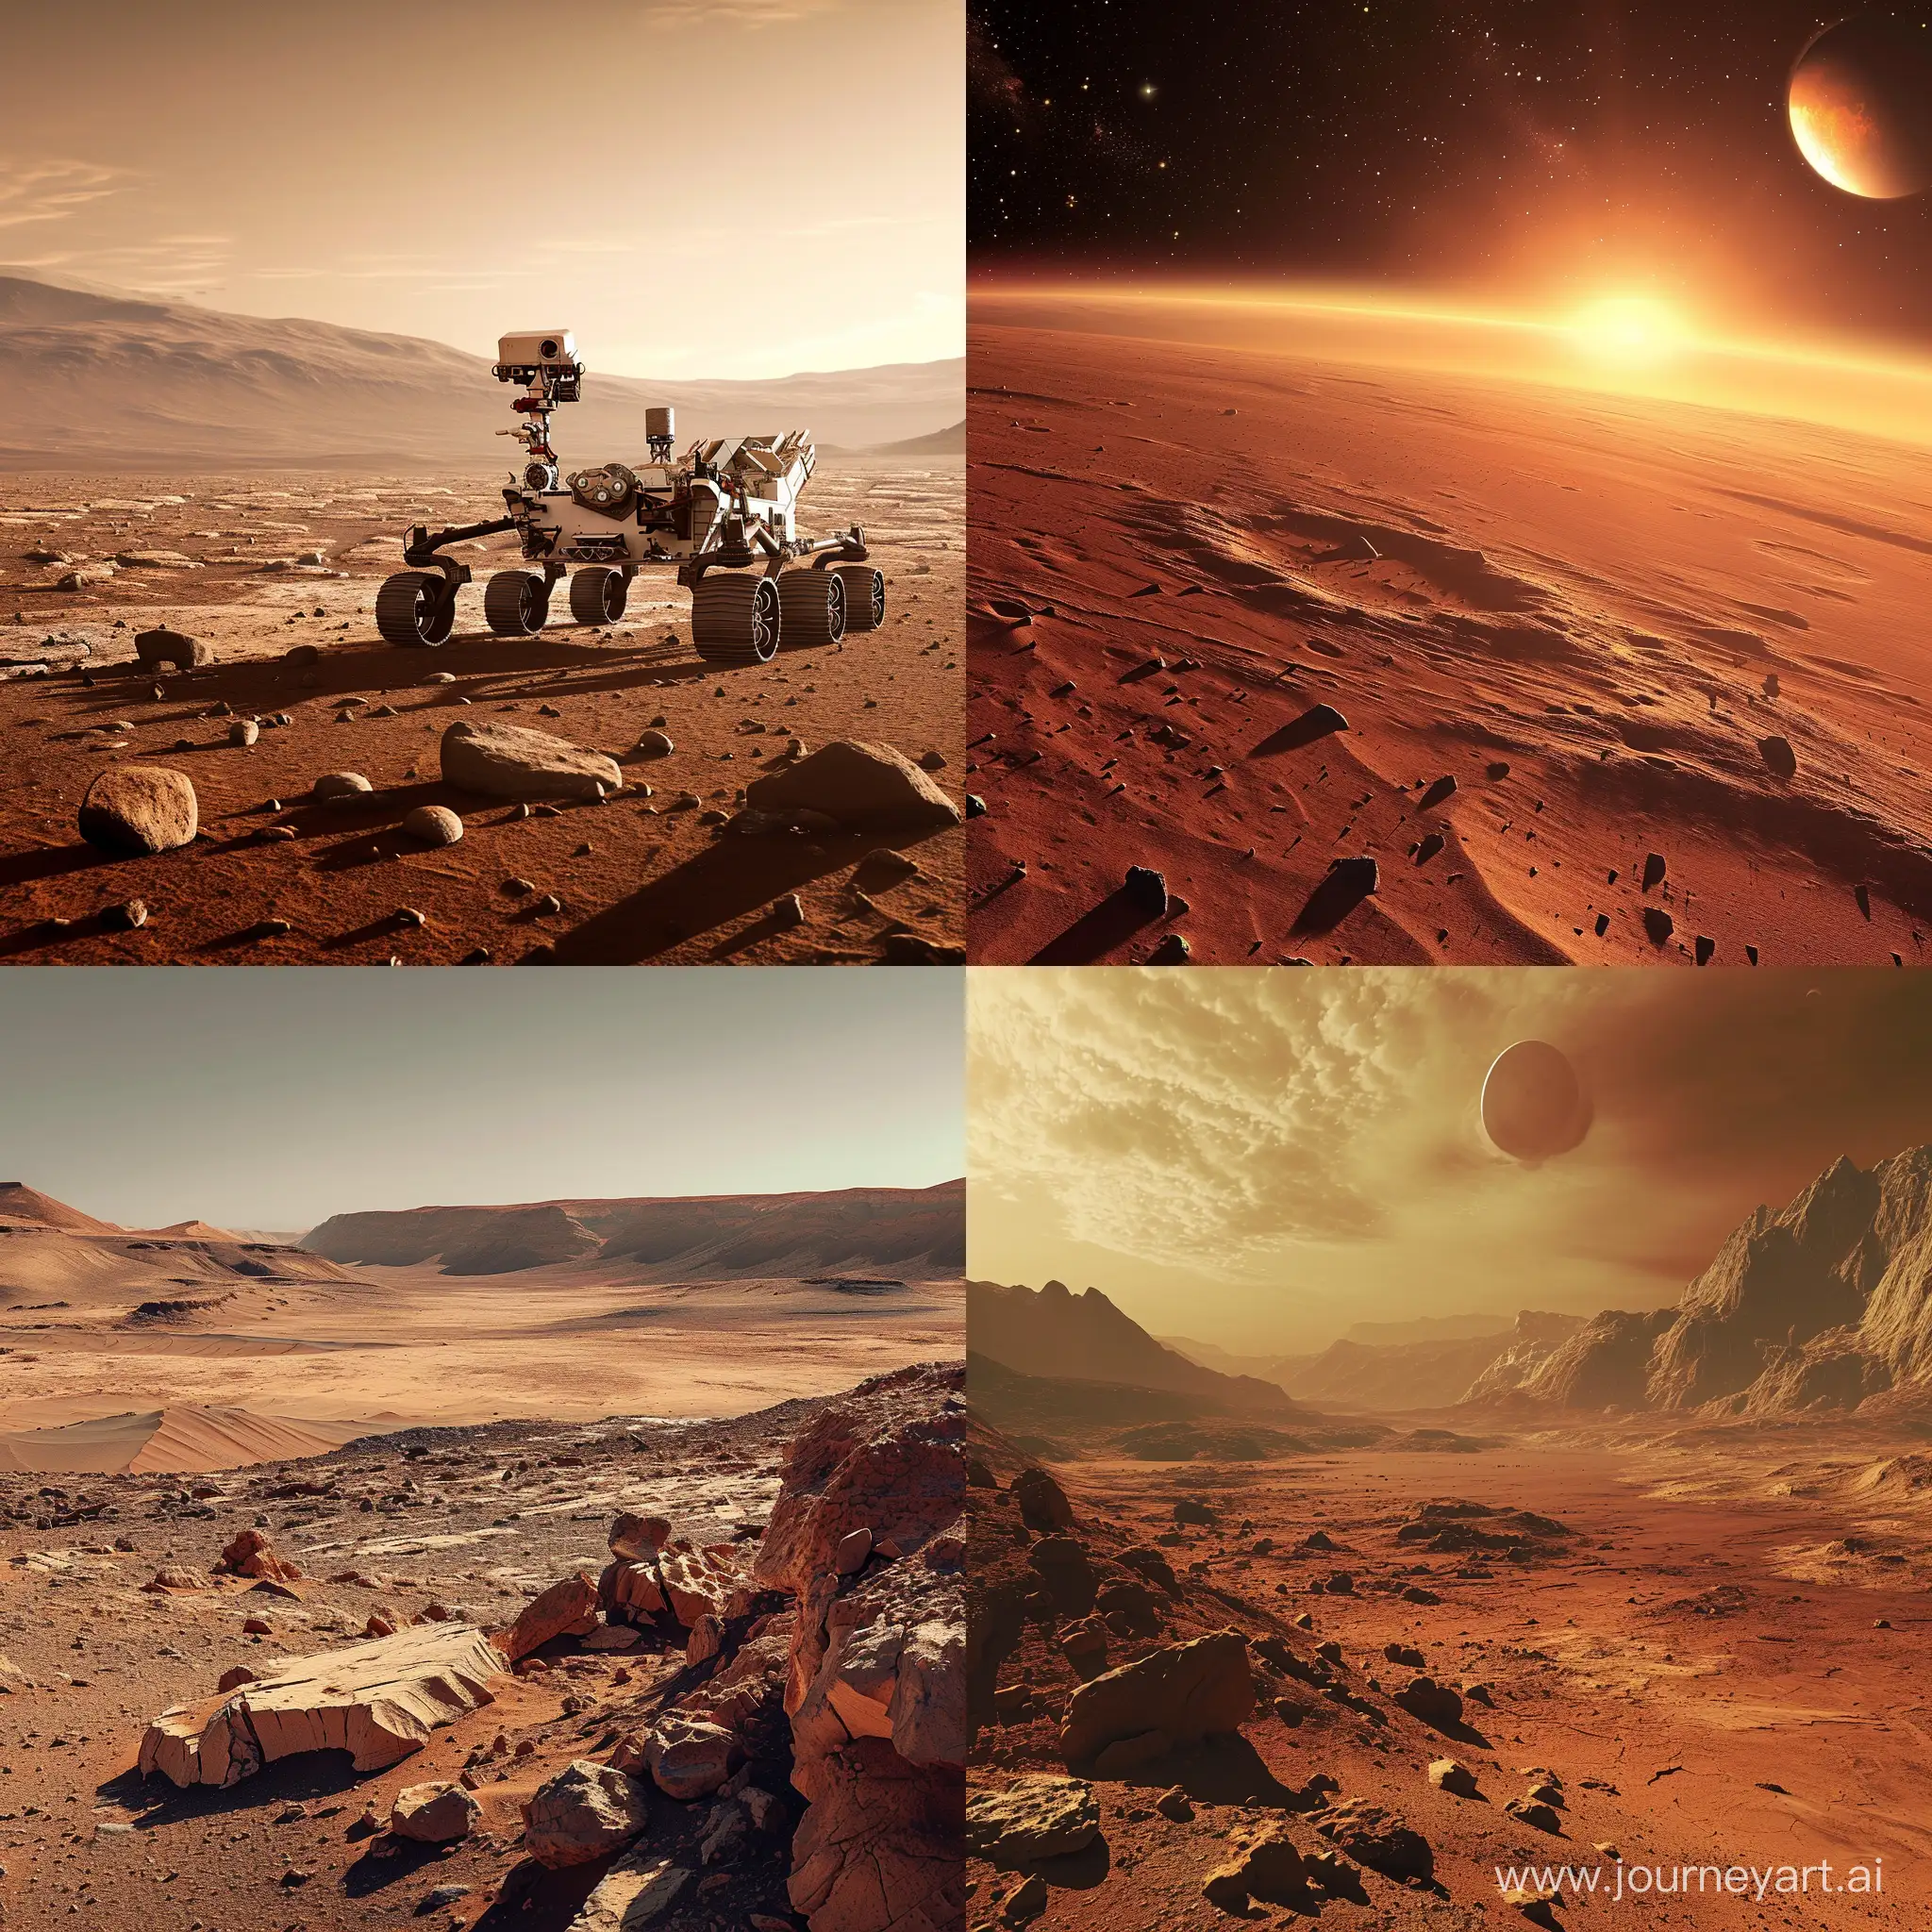 Show me how looks live in Mars